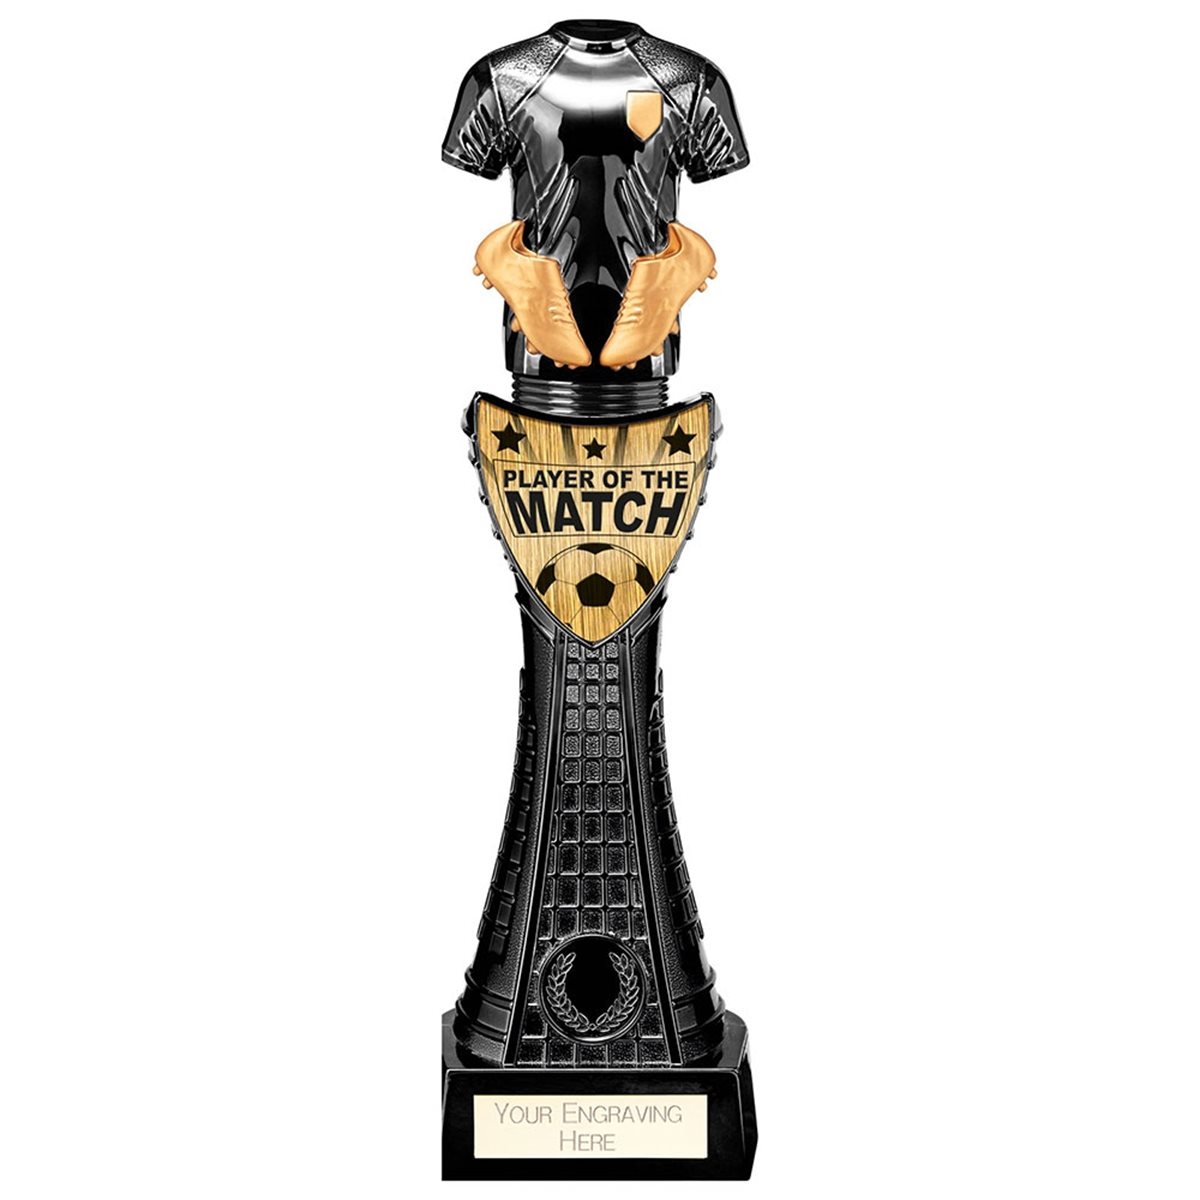 Black Viper Football Series Trophy PM22303 (Click to see all awards)